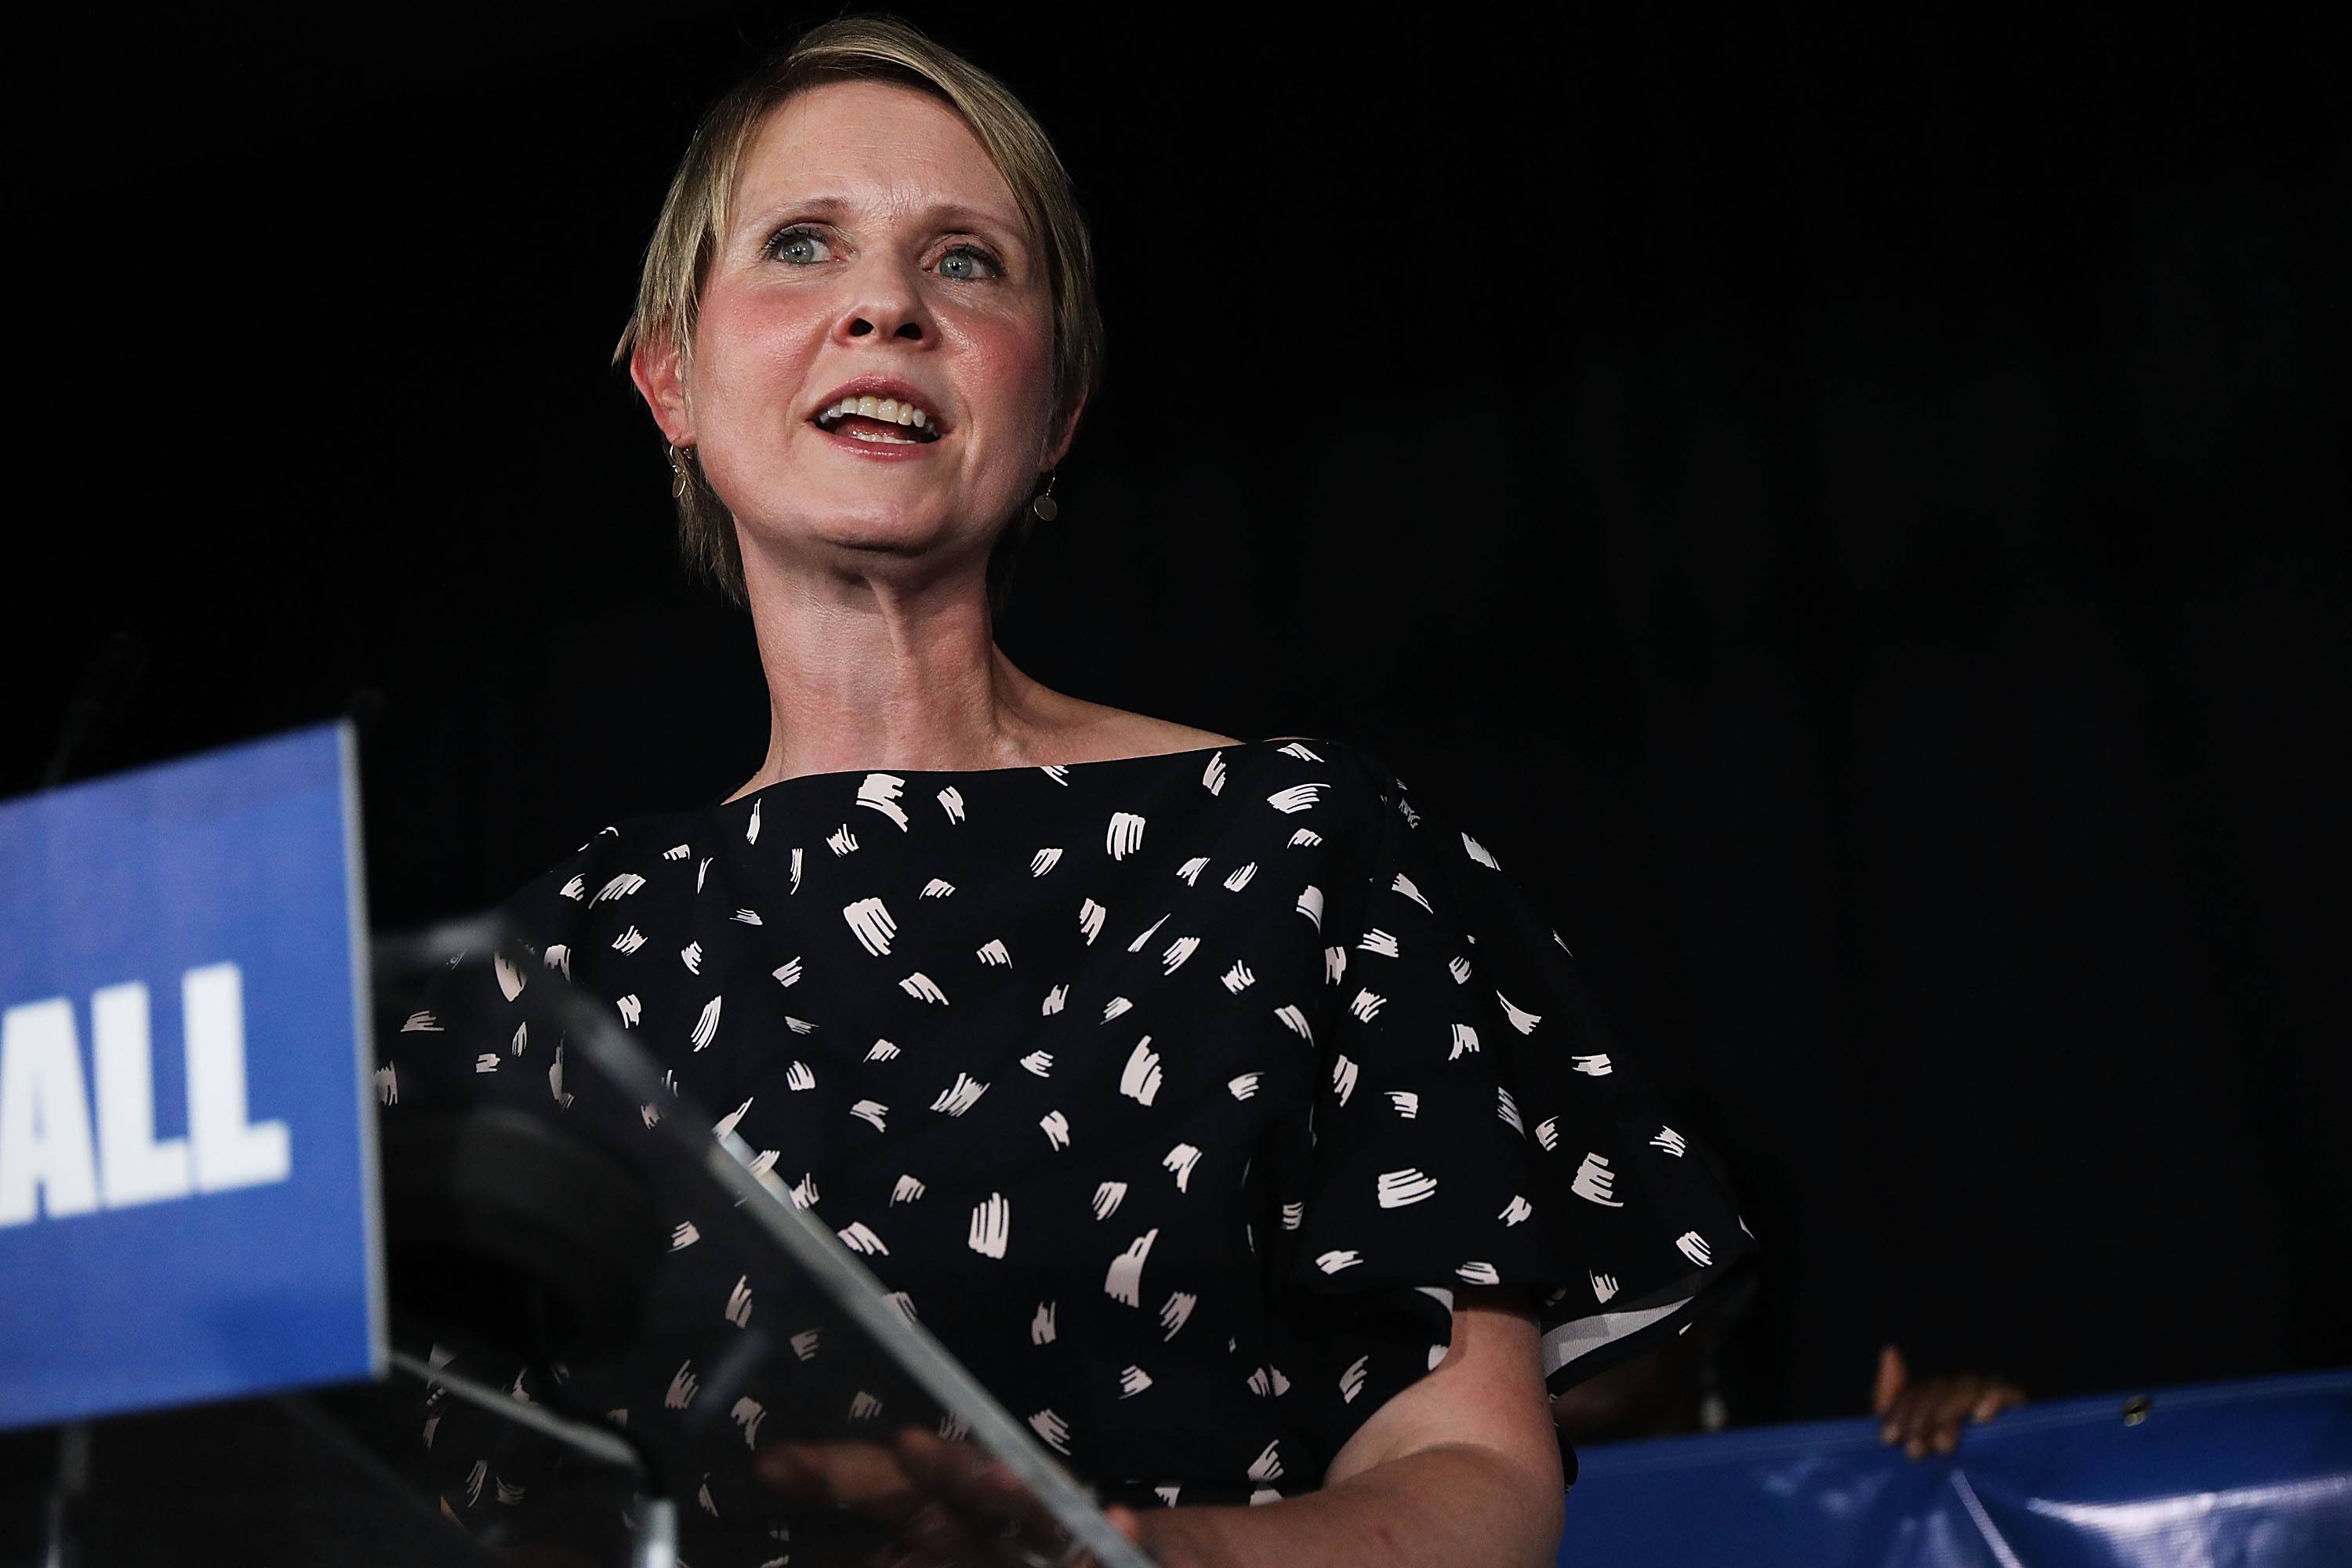 Cynthia Nixon S Concession Speech Was A Rousing Call To Action “this Is Just The Beginning